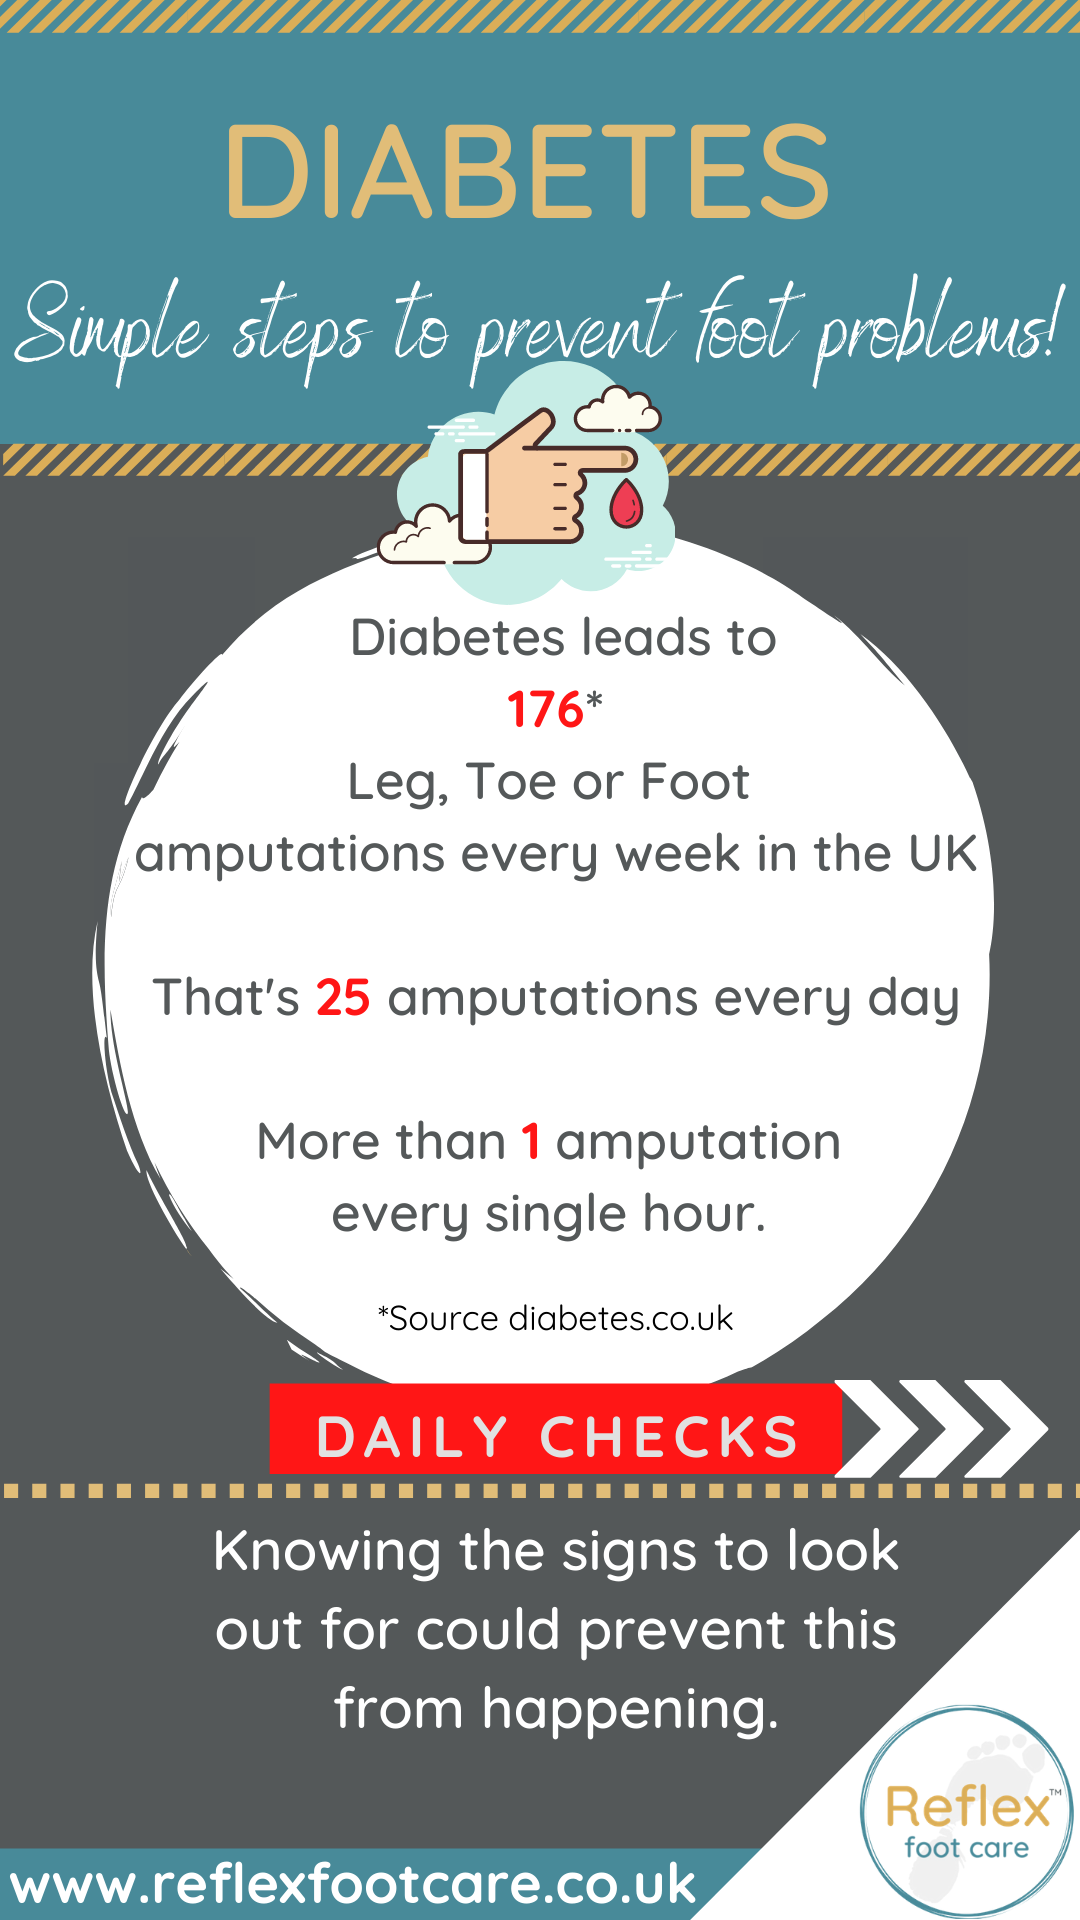 Diabetes, hints & tips for foot care!